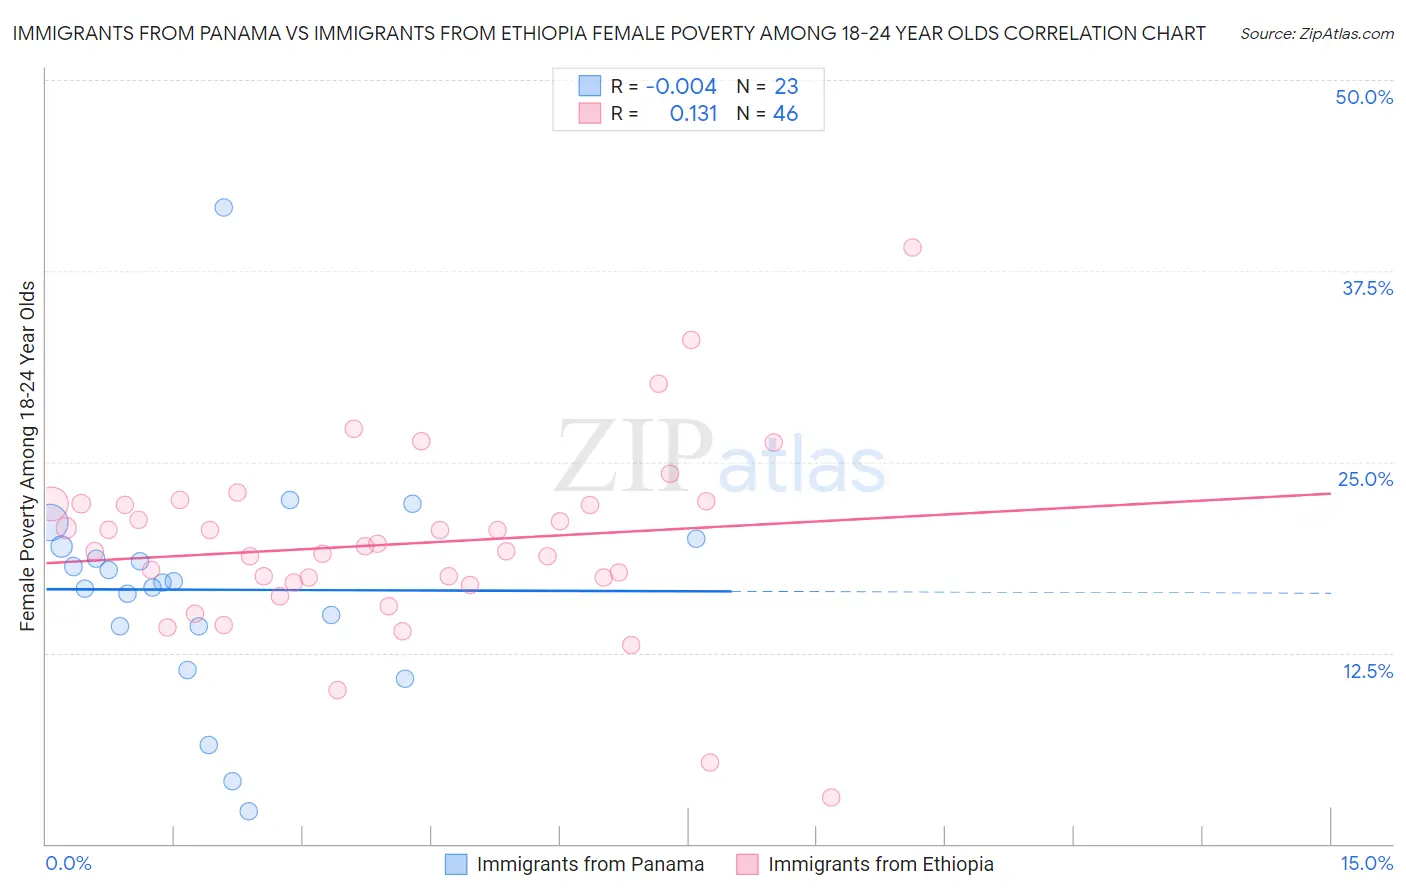 Immigrants from Panama vs Immigrants from Ethiopia Female Poverty Among 18-24 Year Olds